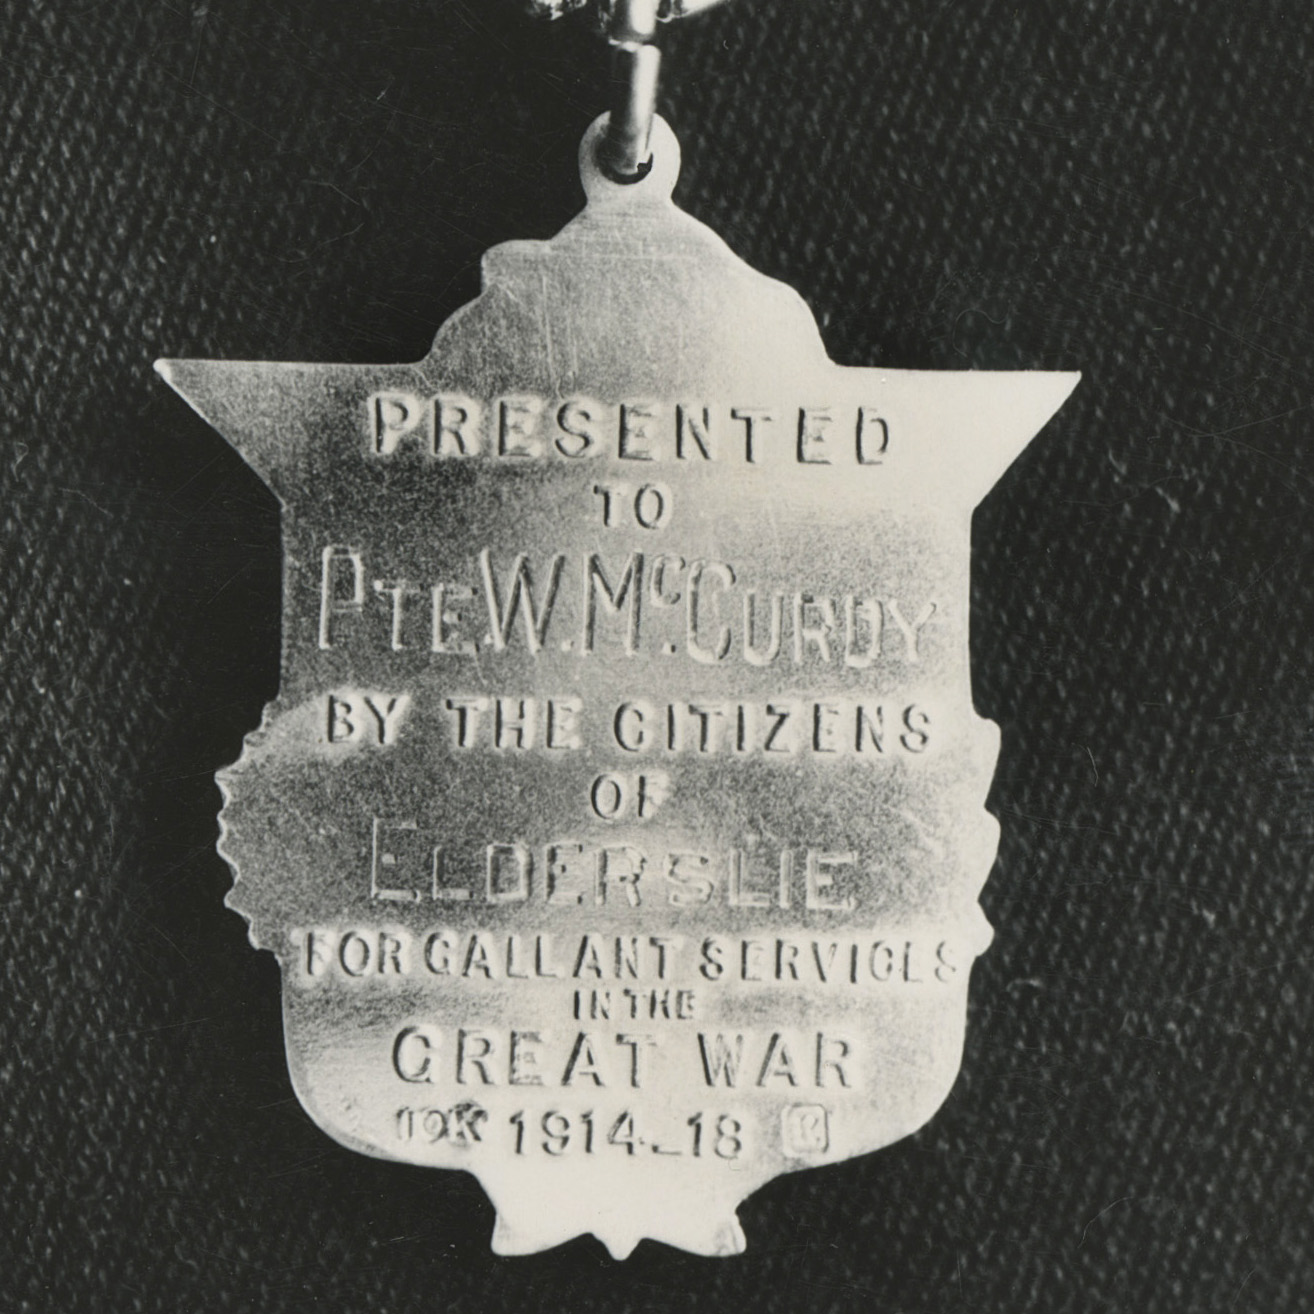 A2020.080.003, Pte. W. McCurdy shield necklace